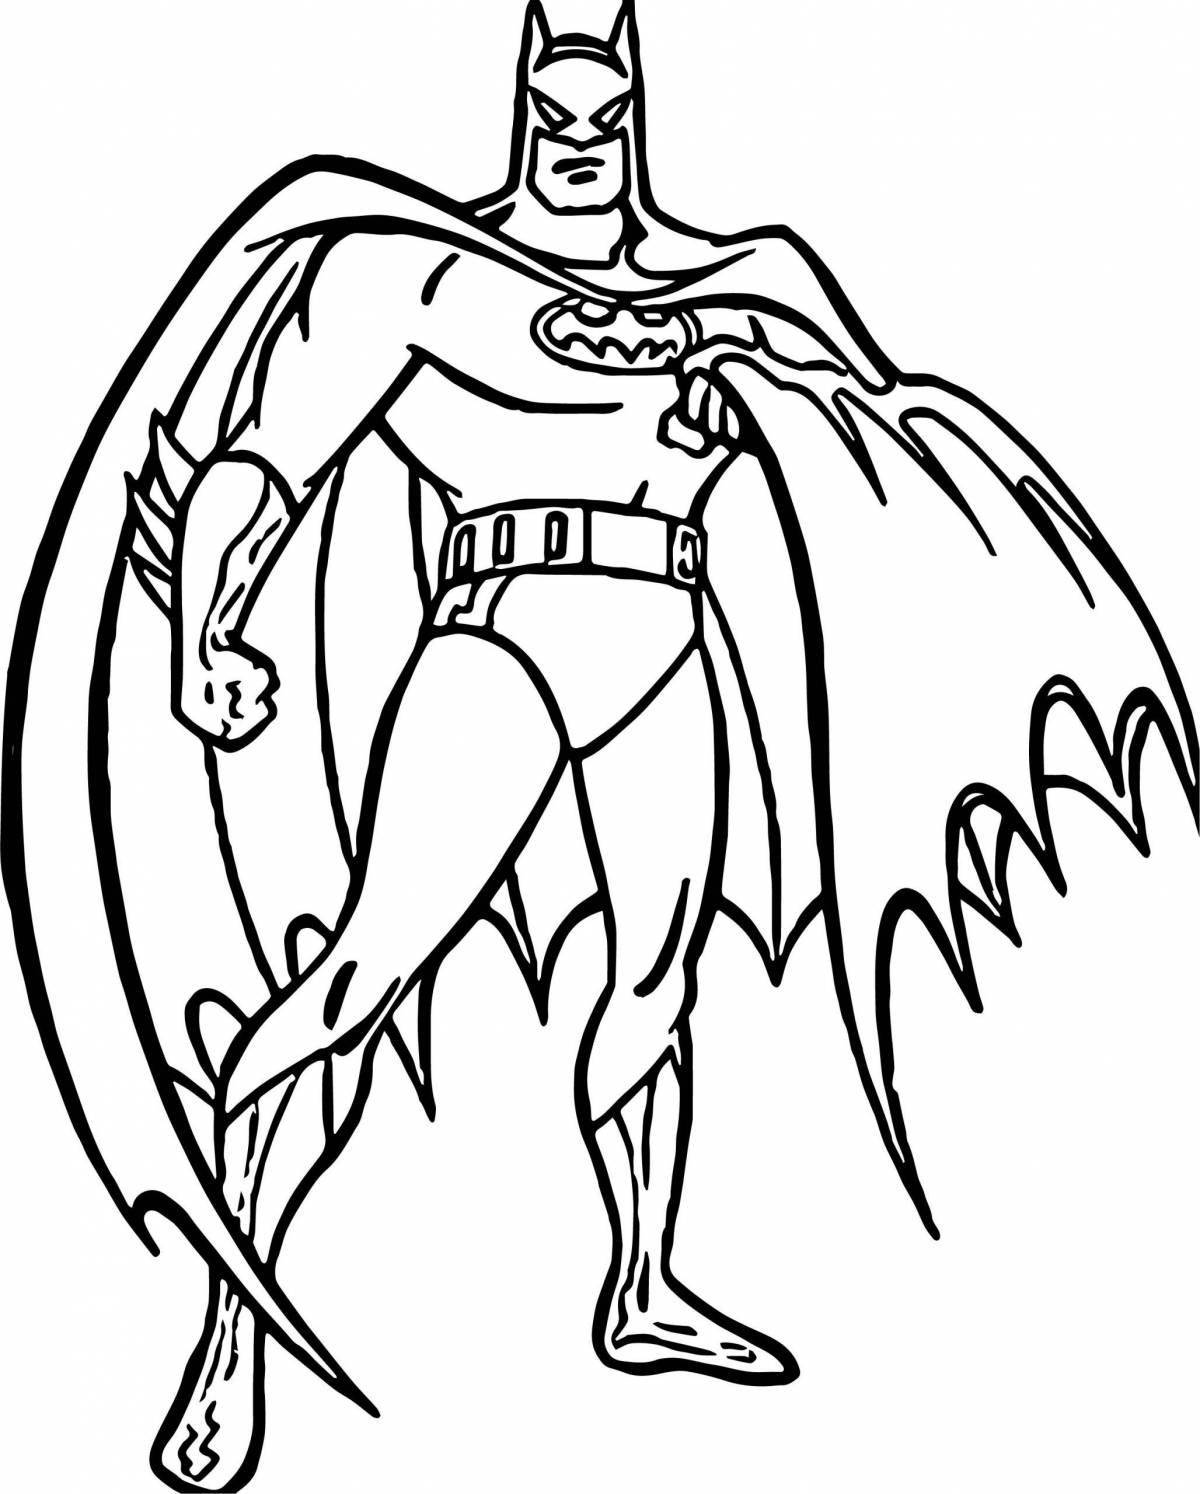 Exciting superhero coloring book for 4-5 year olds